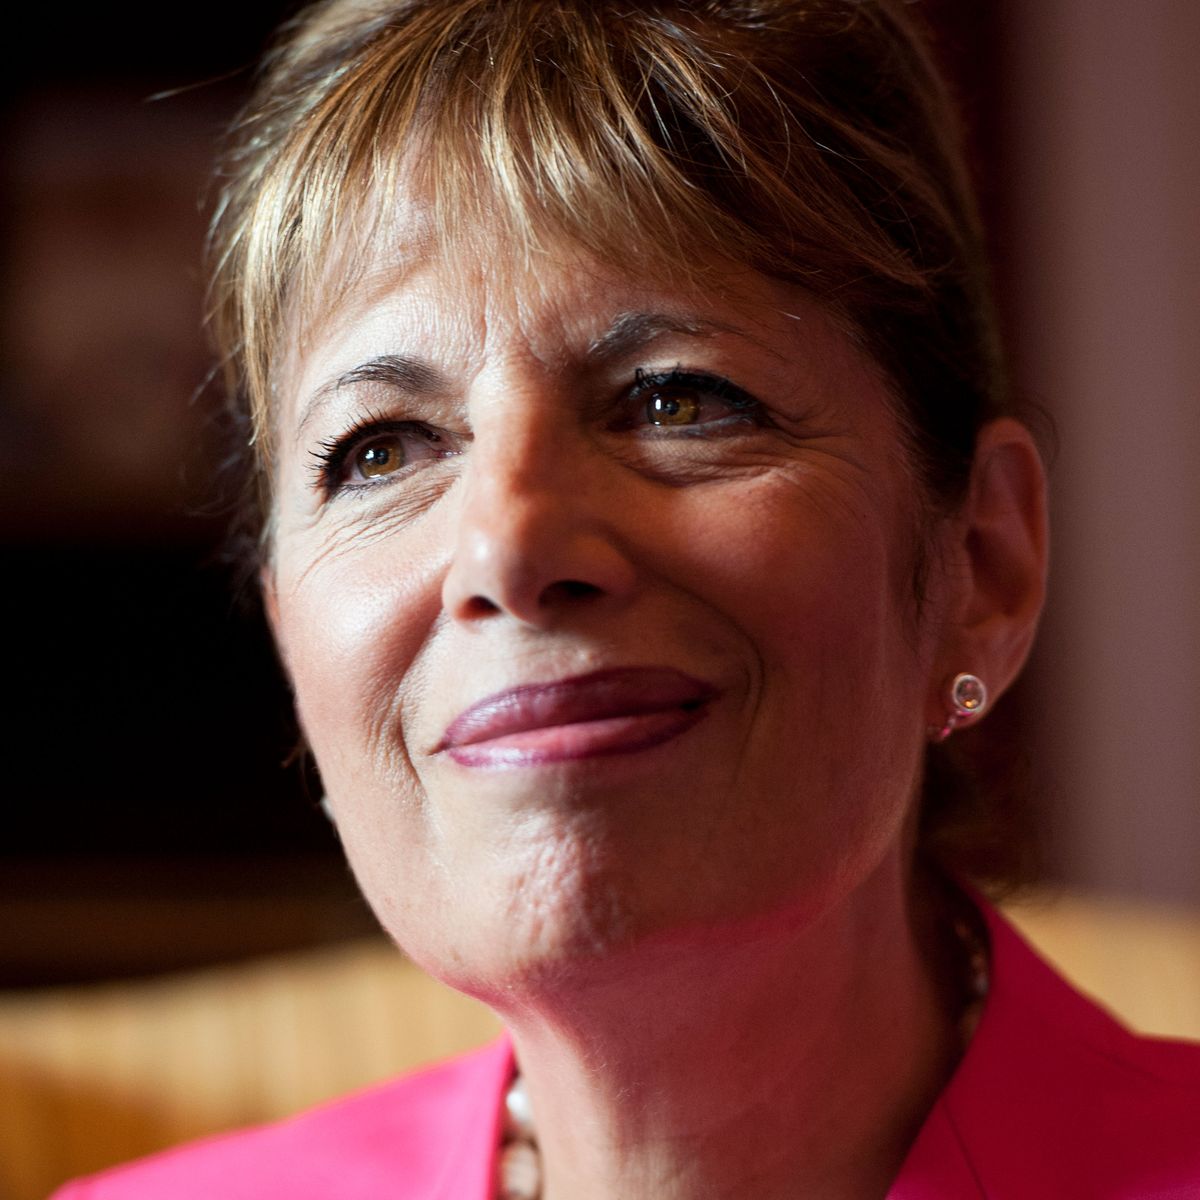 jackie speier wearing a black shirt, pink suit jacket, a white necklace and staring just off to the side of the camera